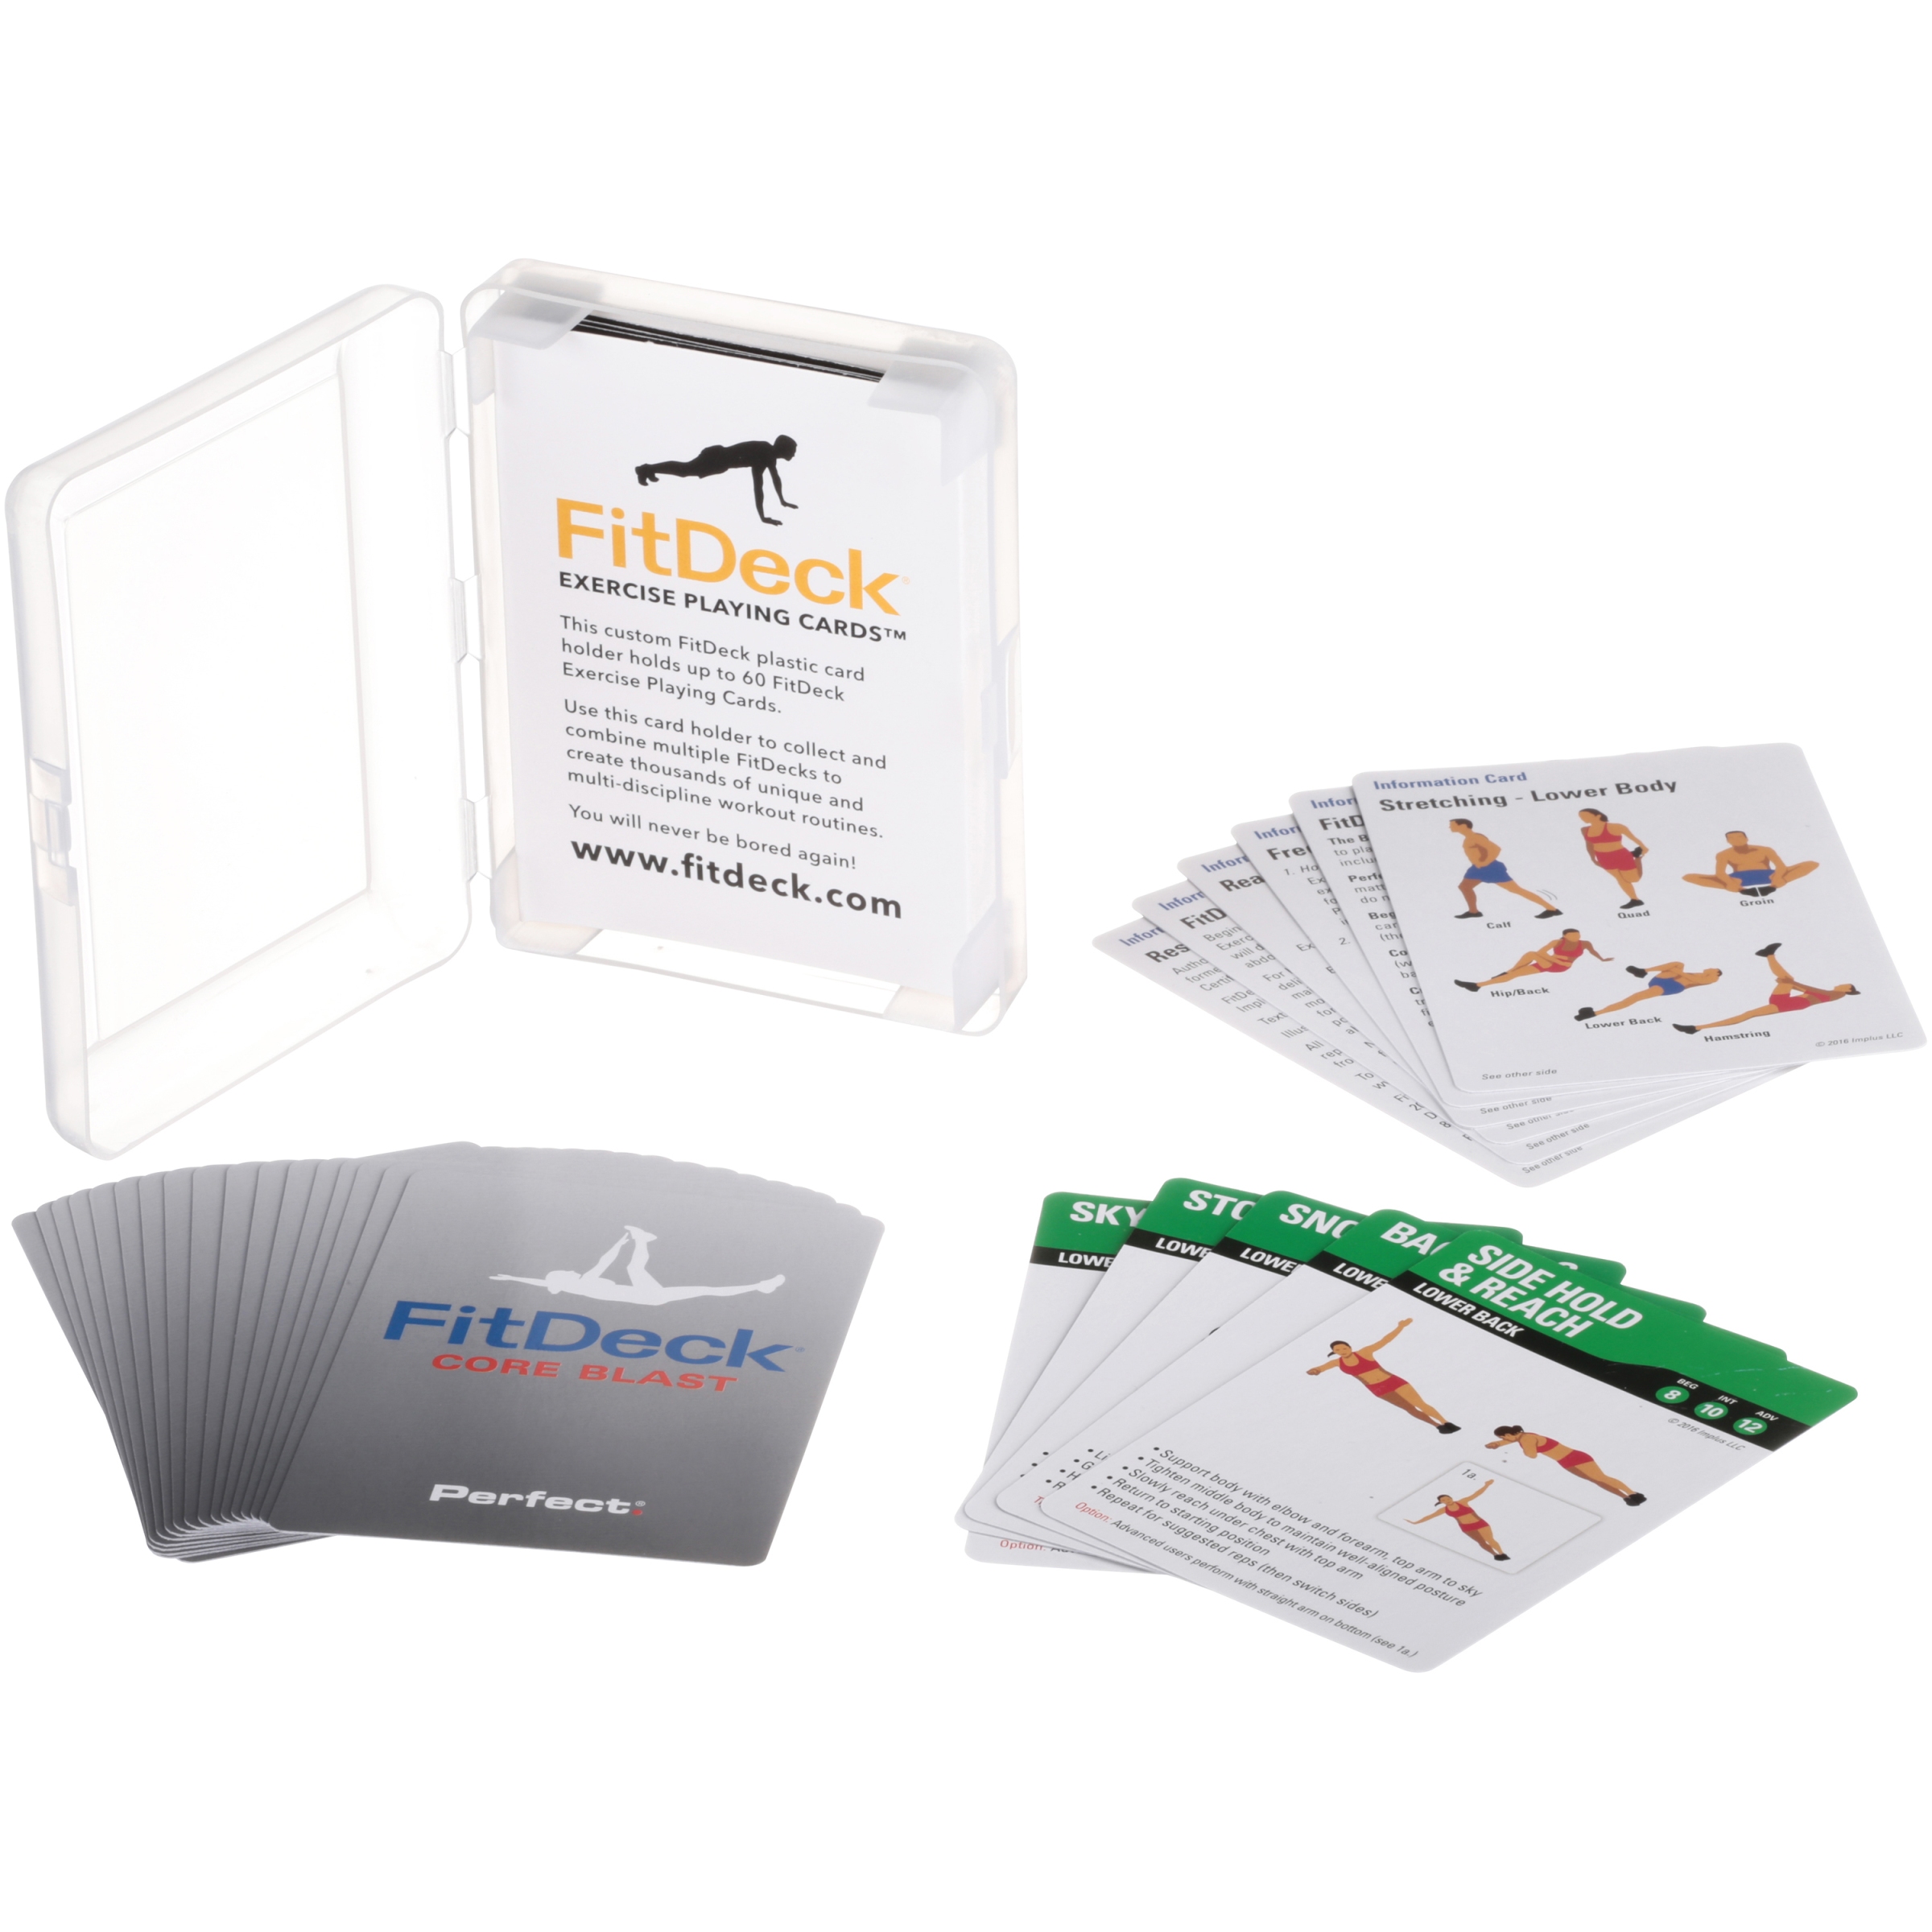 PerfectÂ® FitDeckÂ® Core Blast Exercise Playing Cards Booster Deck 28 pc Pack - image 1 of 4